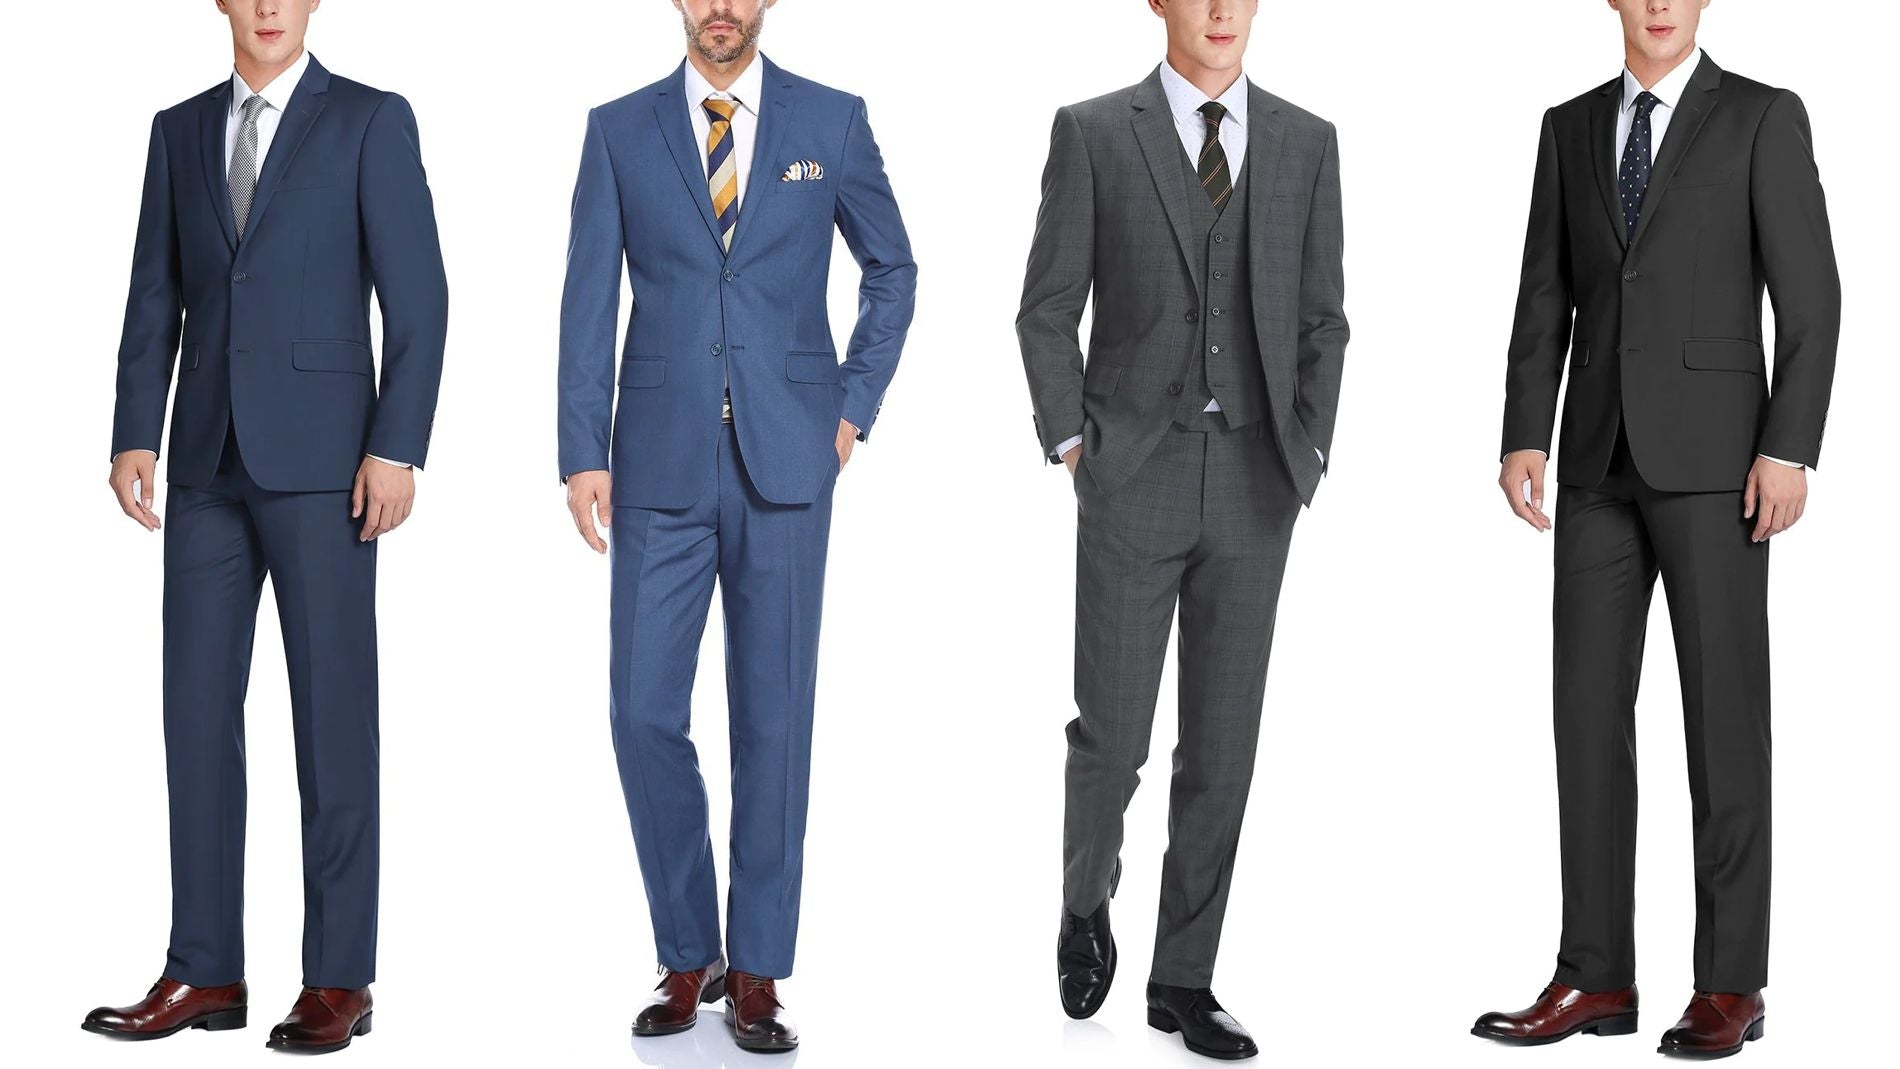 Suits from Renoir, Rivelino, and English Laundry at J. Men's Clothing